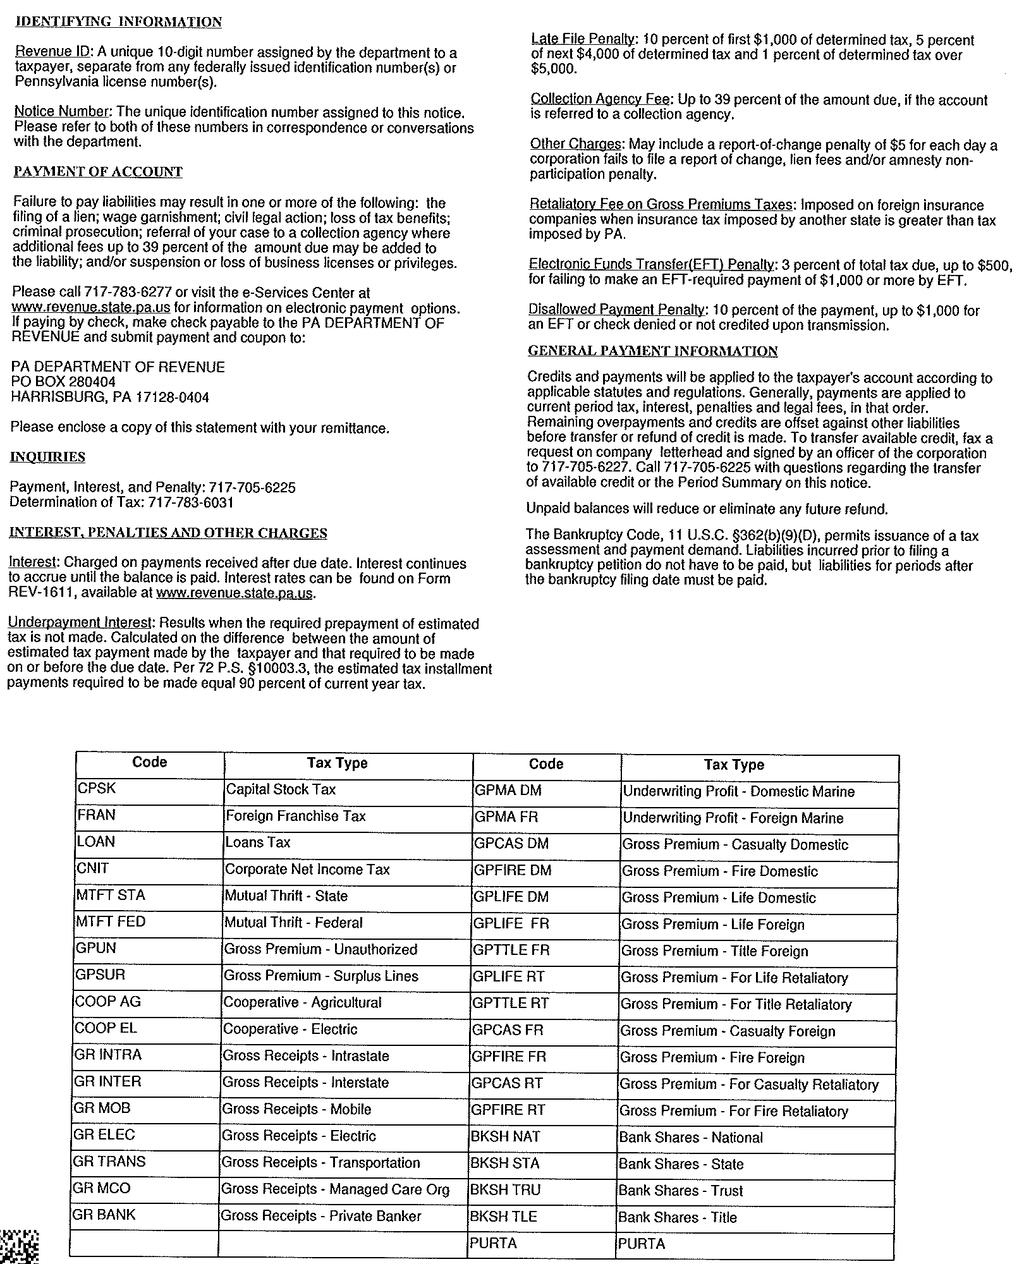 Taxpayers are encouraged to view the reverse side of ALL notices. Shown above is the reverse side of a Statement of Account.